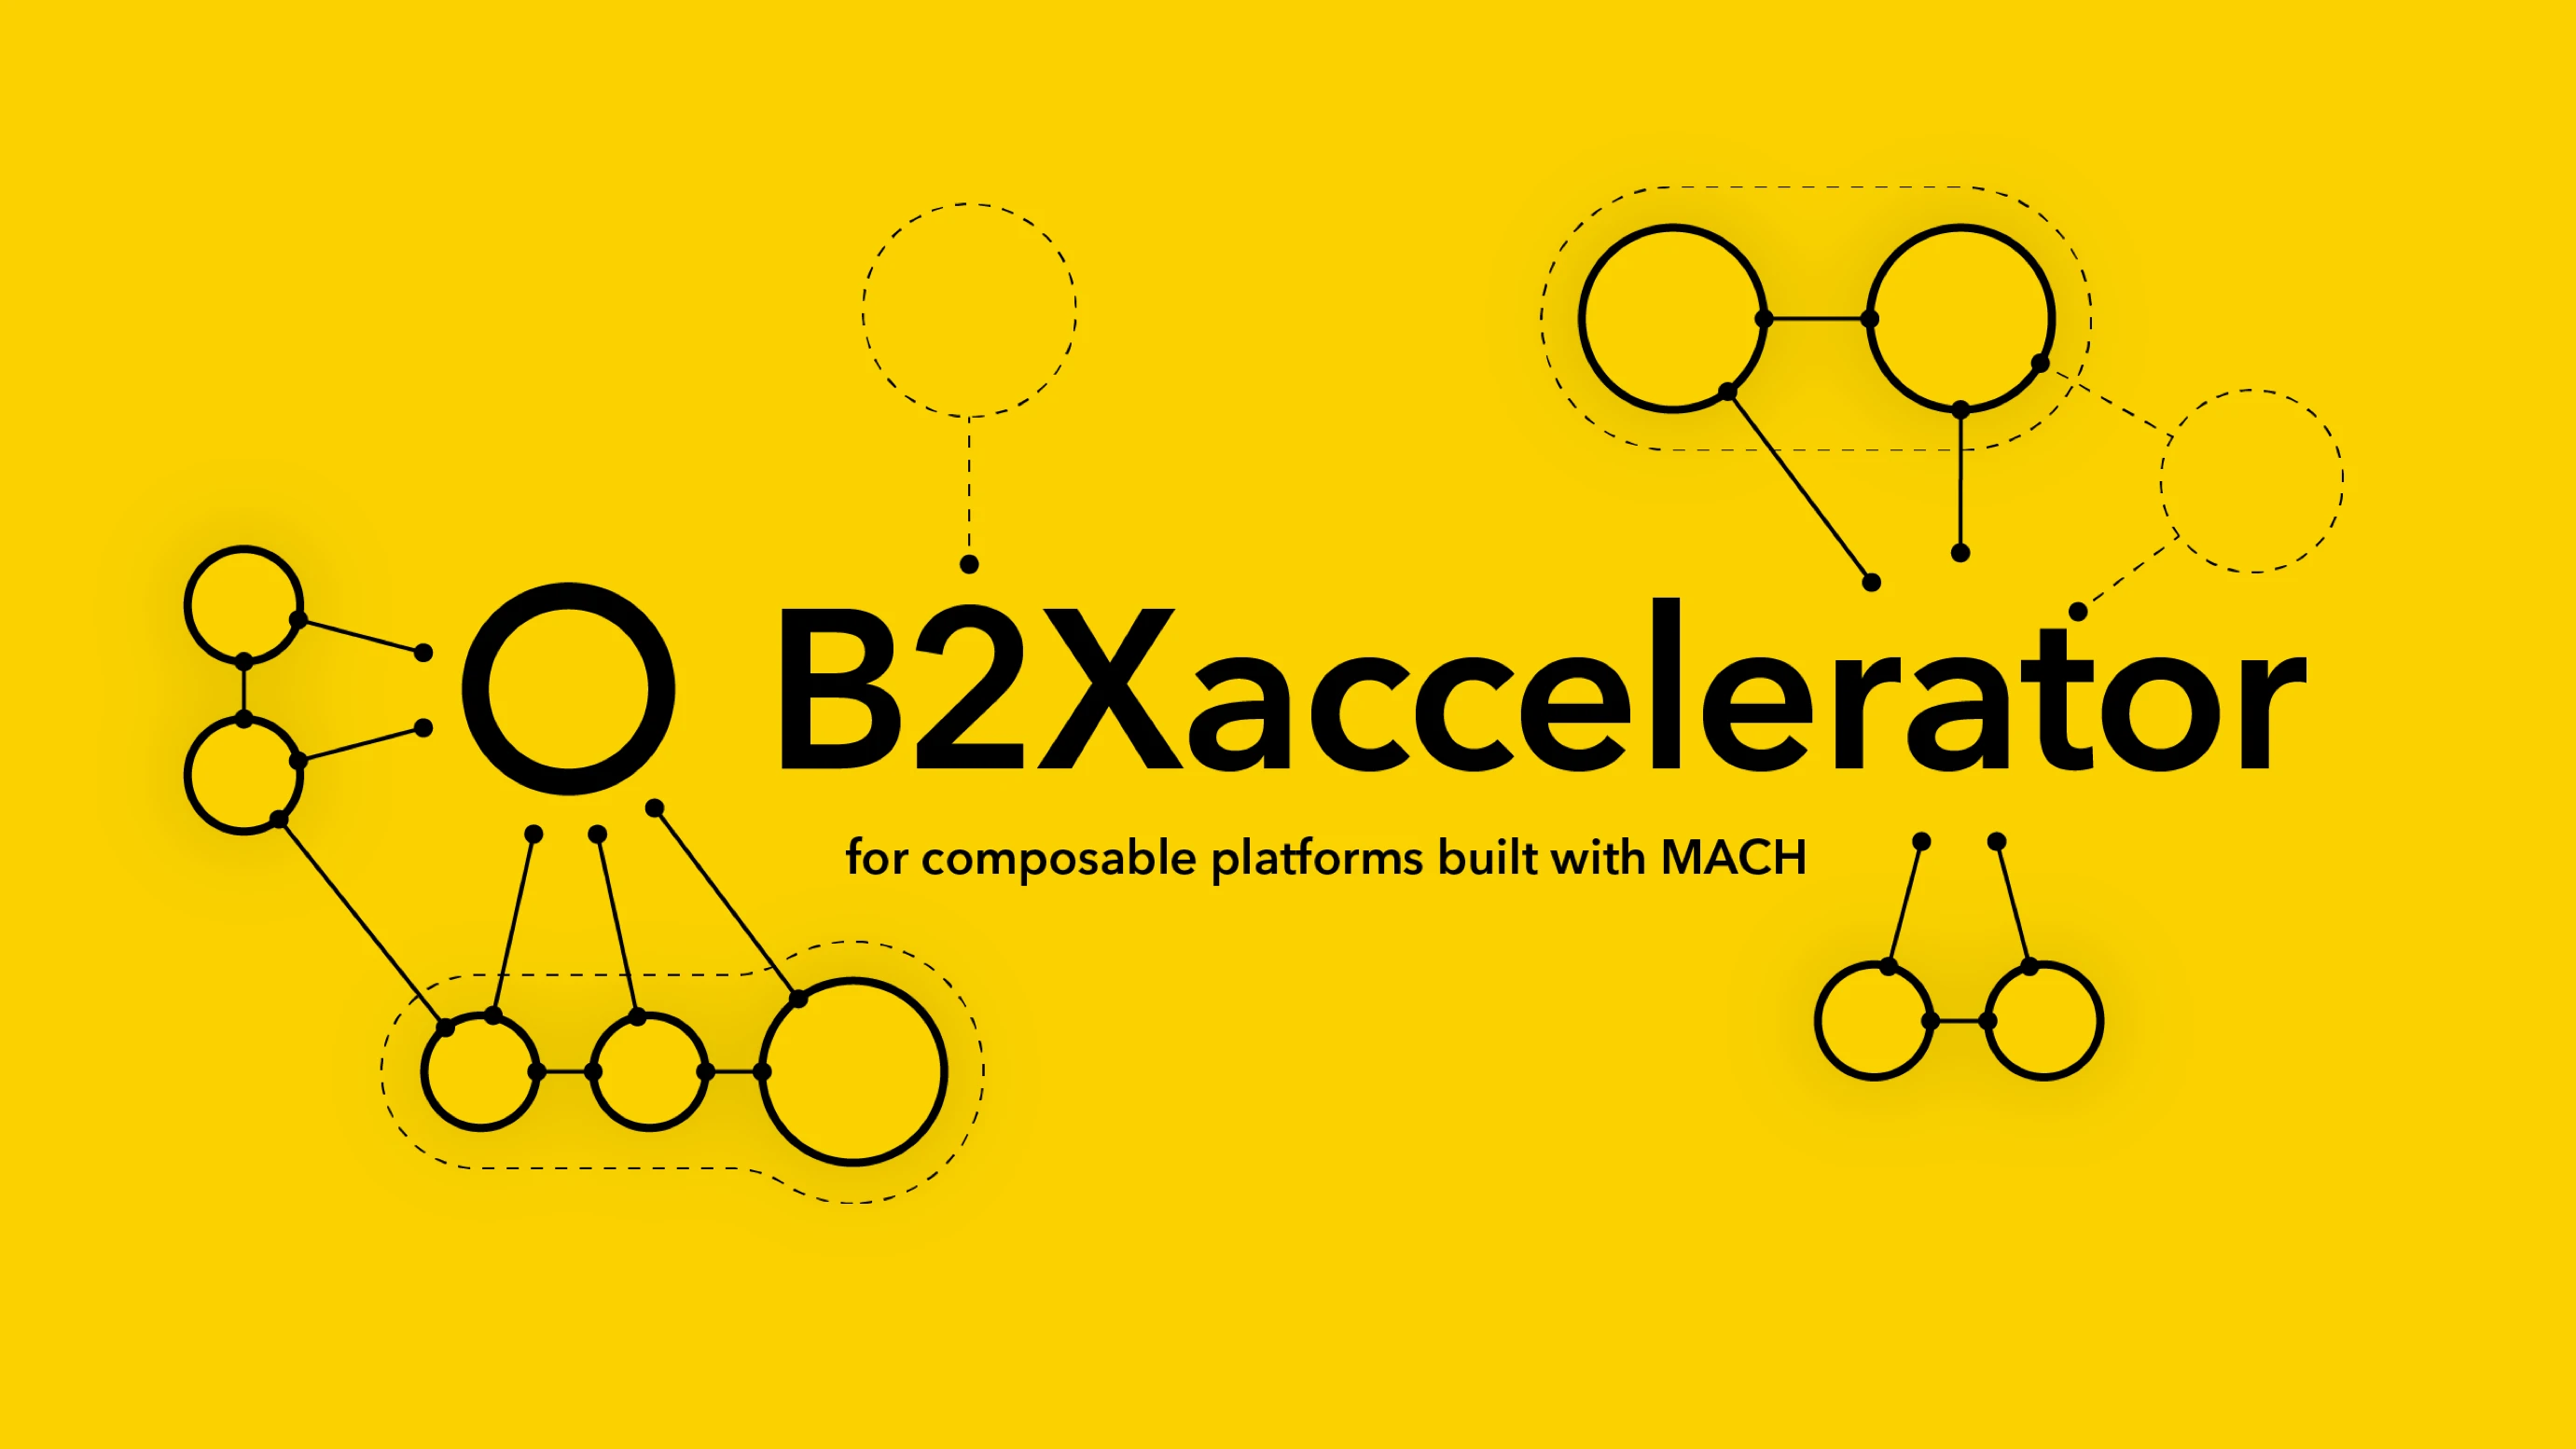 B2Xaccelerator for composable platforms build with MACH